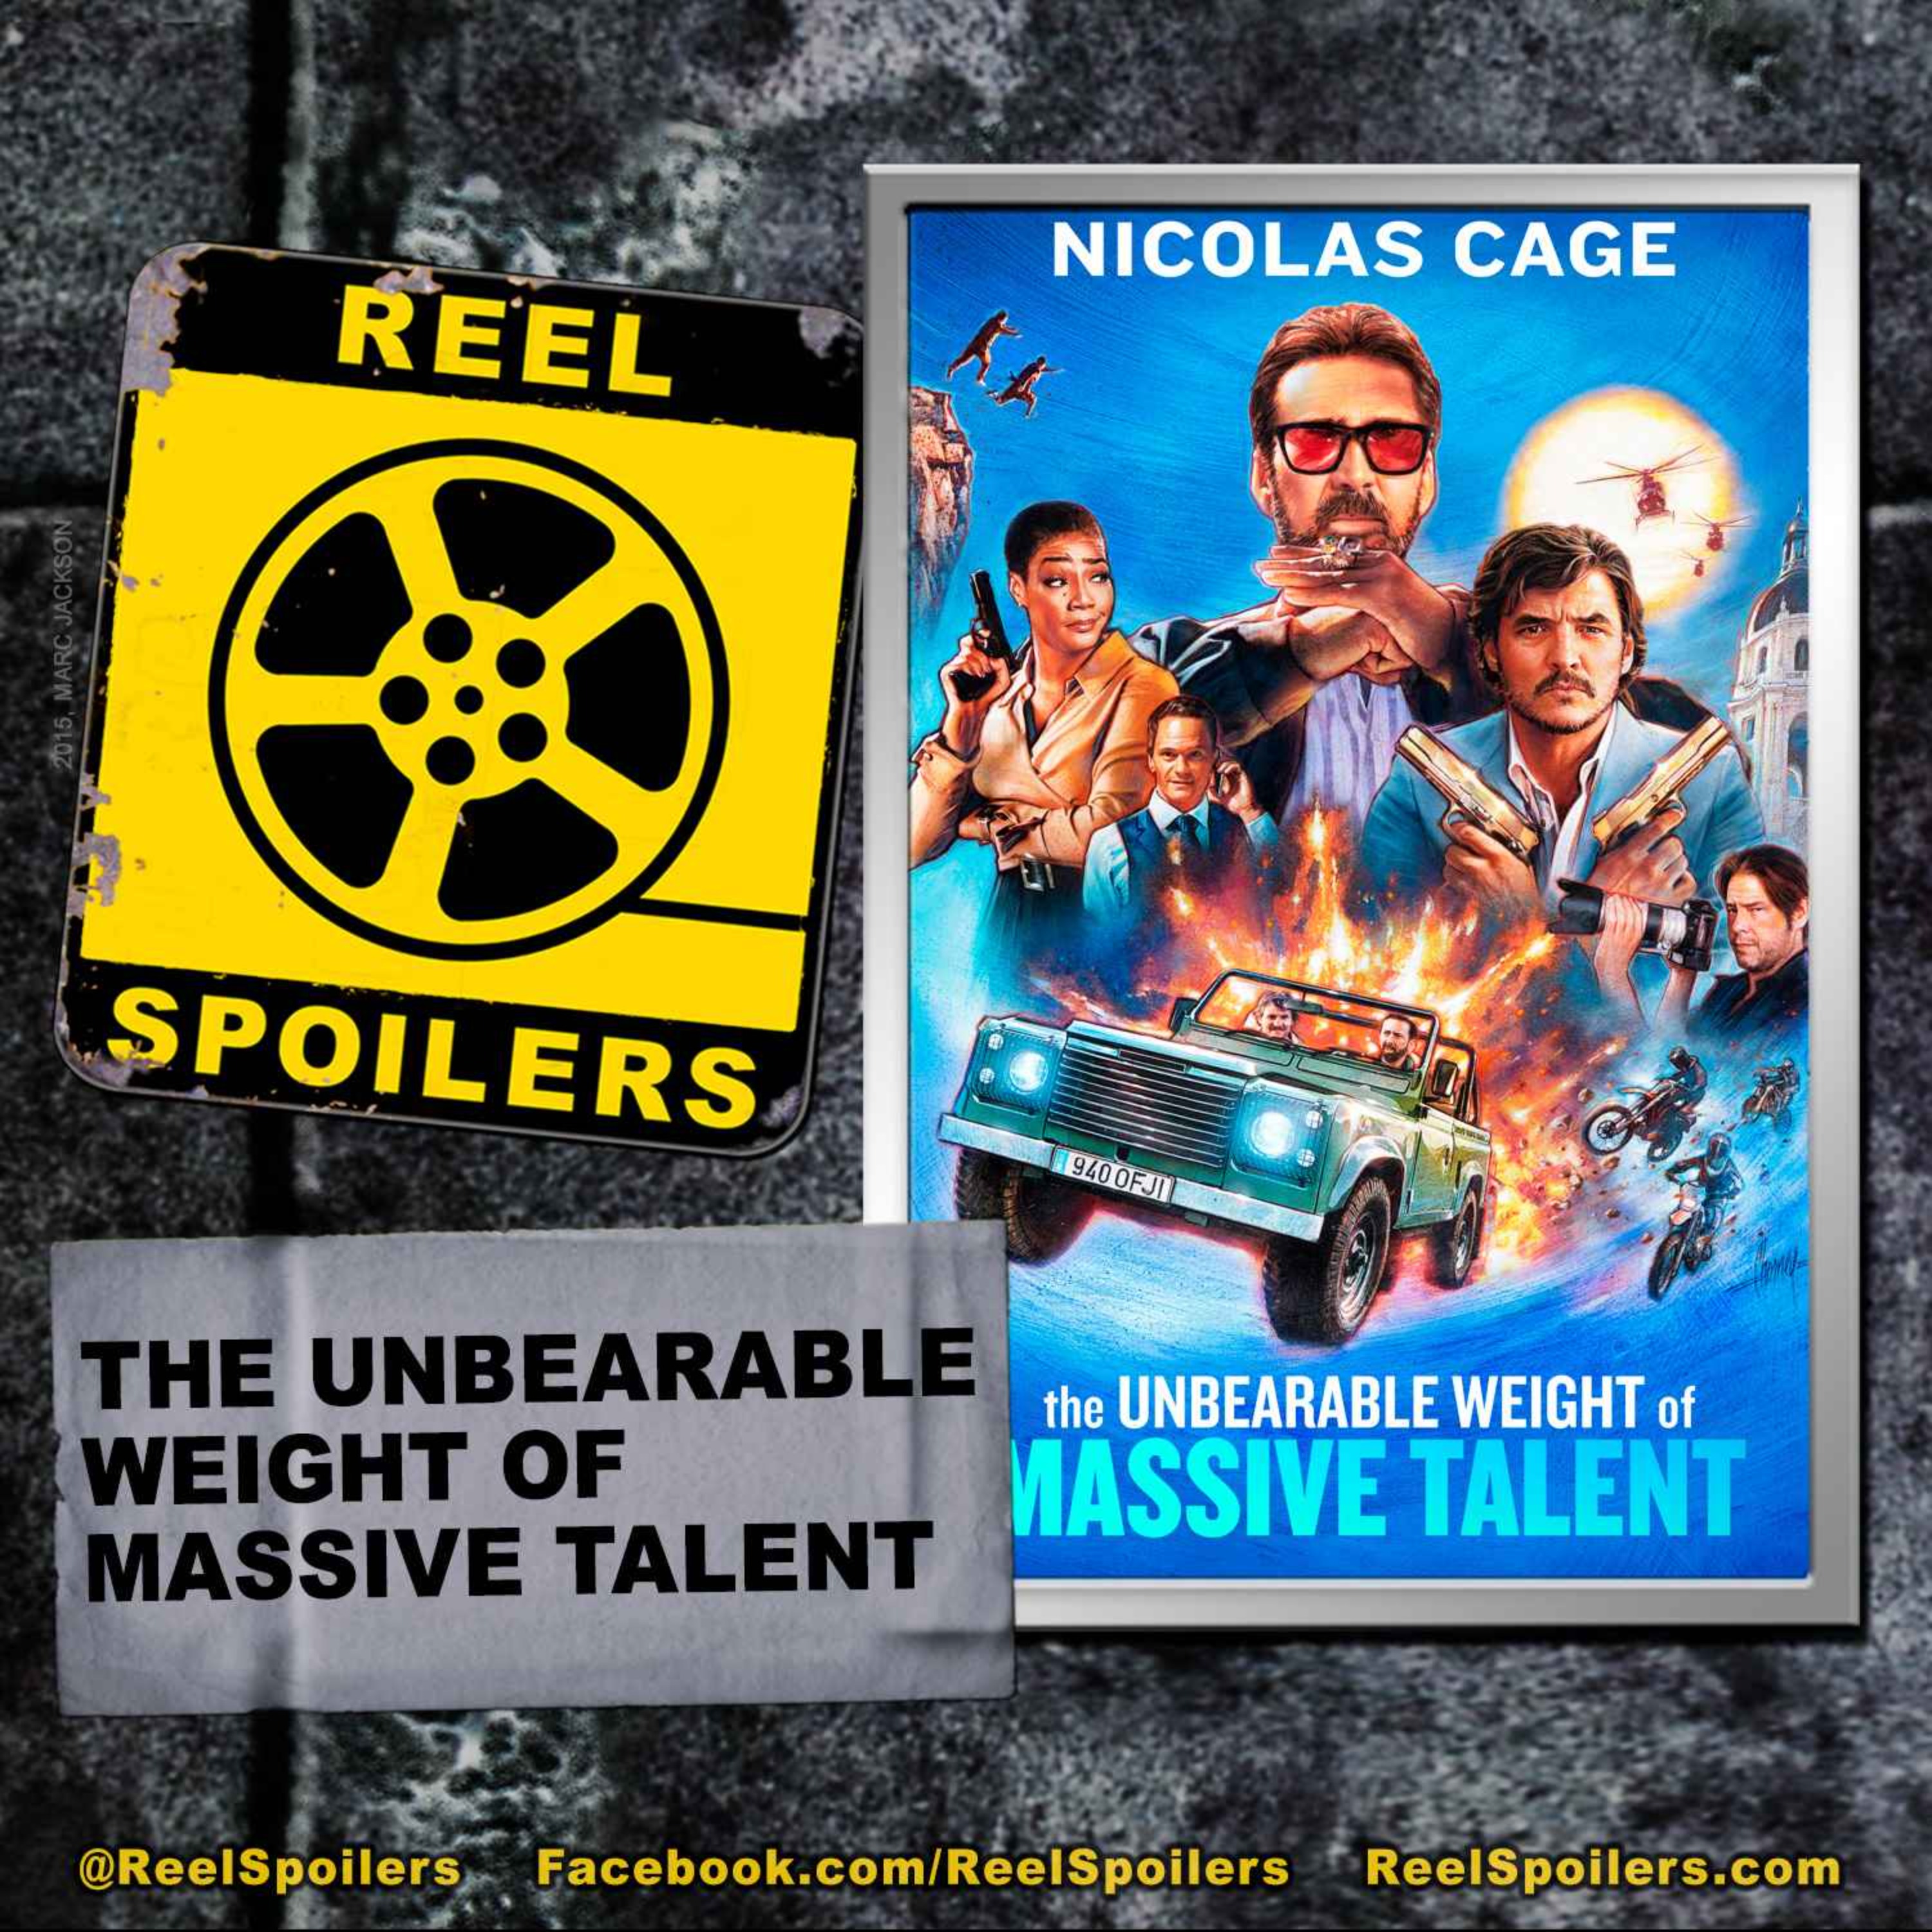 THE UNBEARABLE WEIGHT OF MASSIVE TALENT Starring Nicolas Cage, Pedro Pascal Image